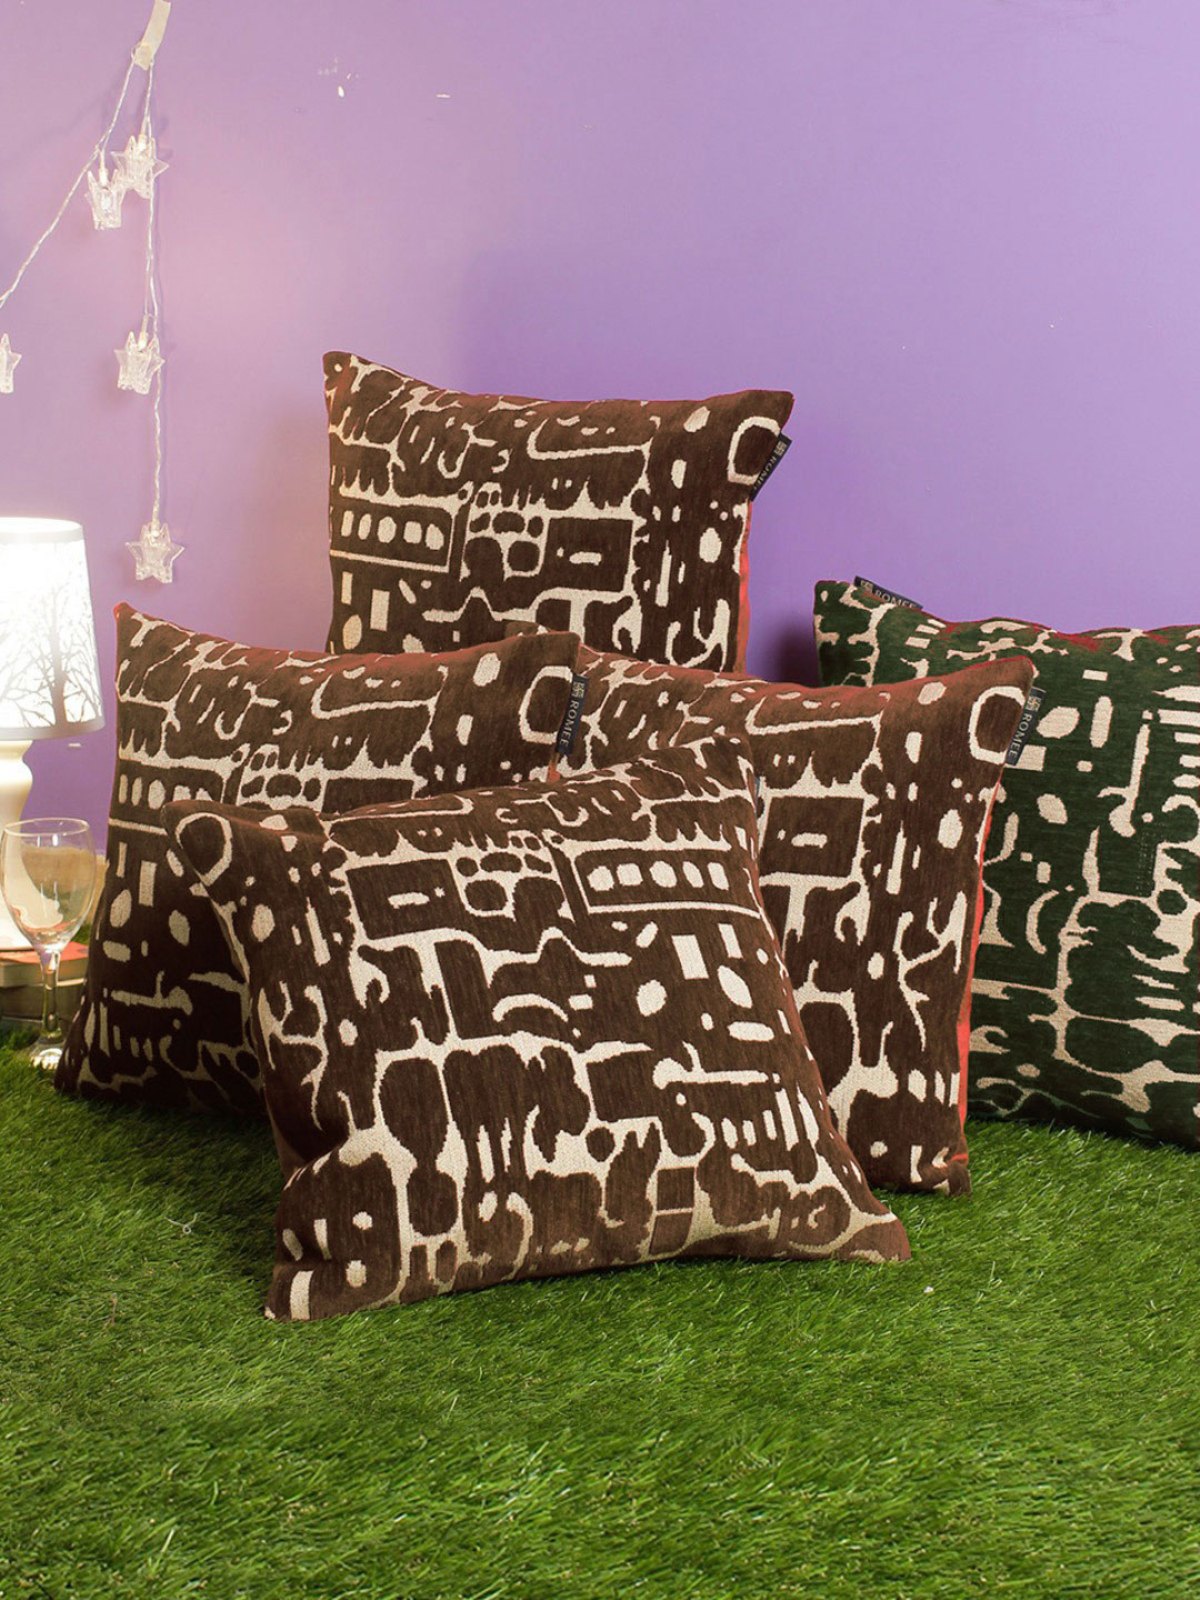 Coffee Brown Set of 5 Cushion Covers